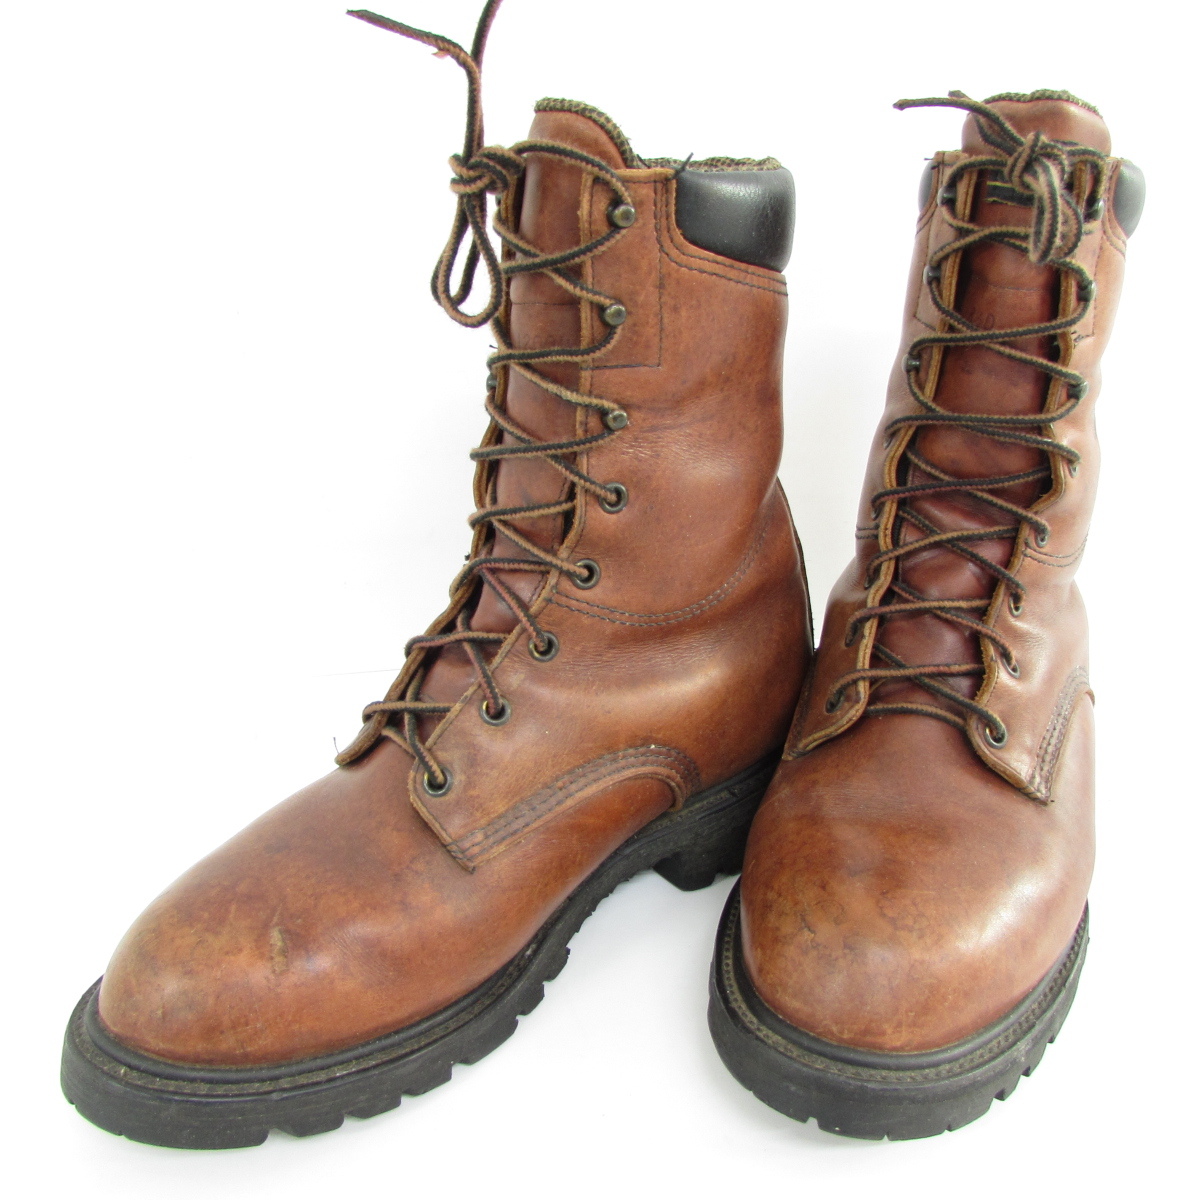 RED WING レッドウィング GORE-TEX BOOTS 1229 SIZE:8.5D ブーツ ▼SH6006